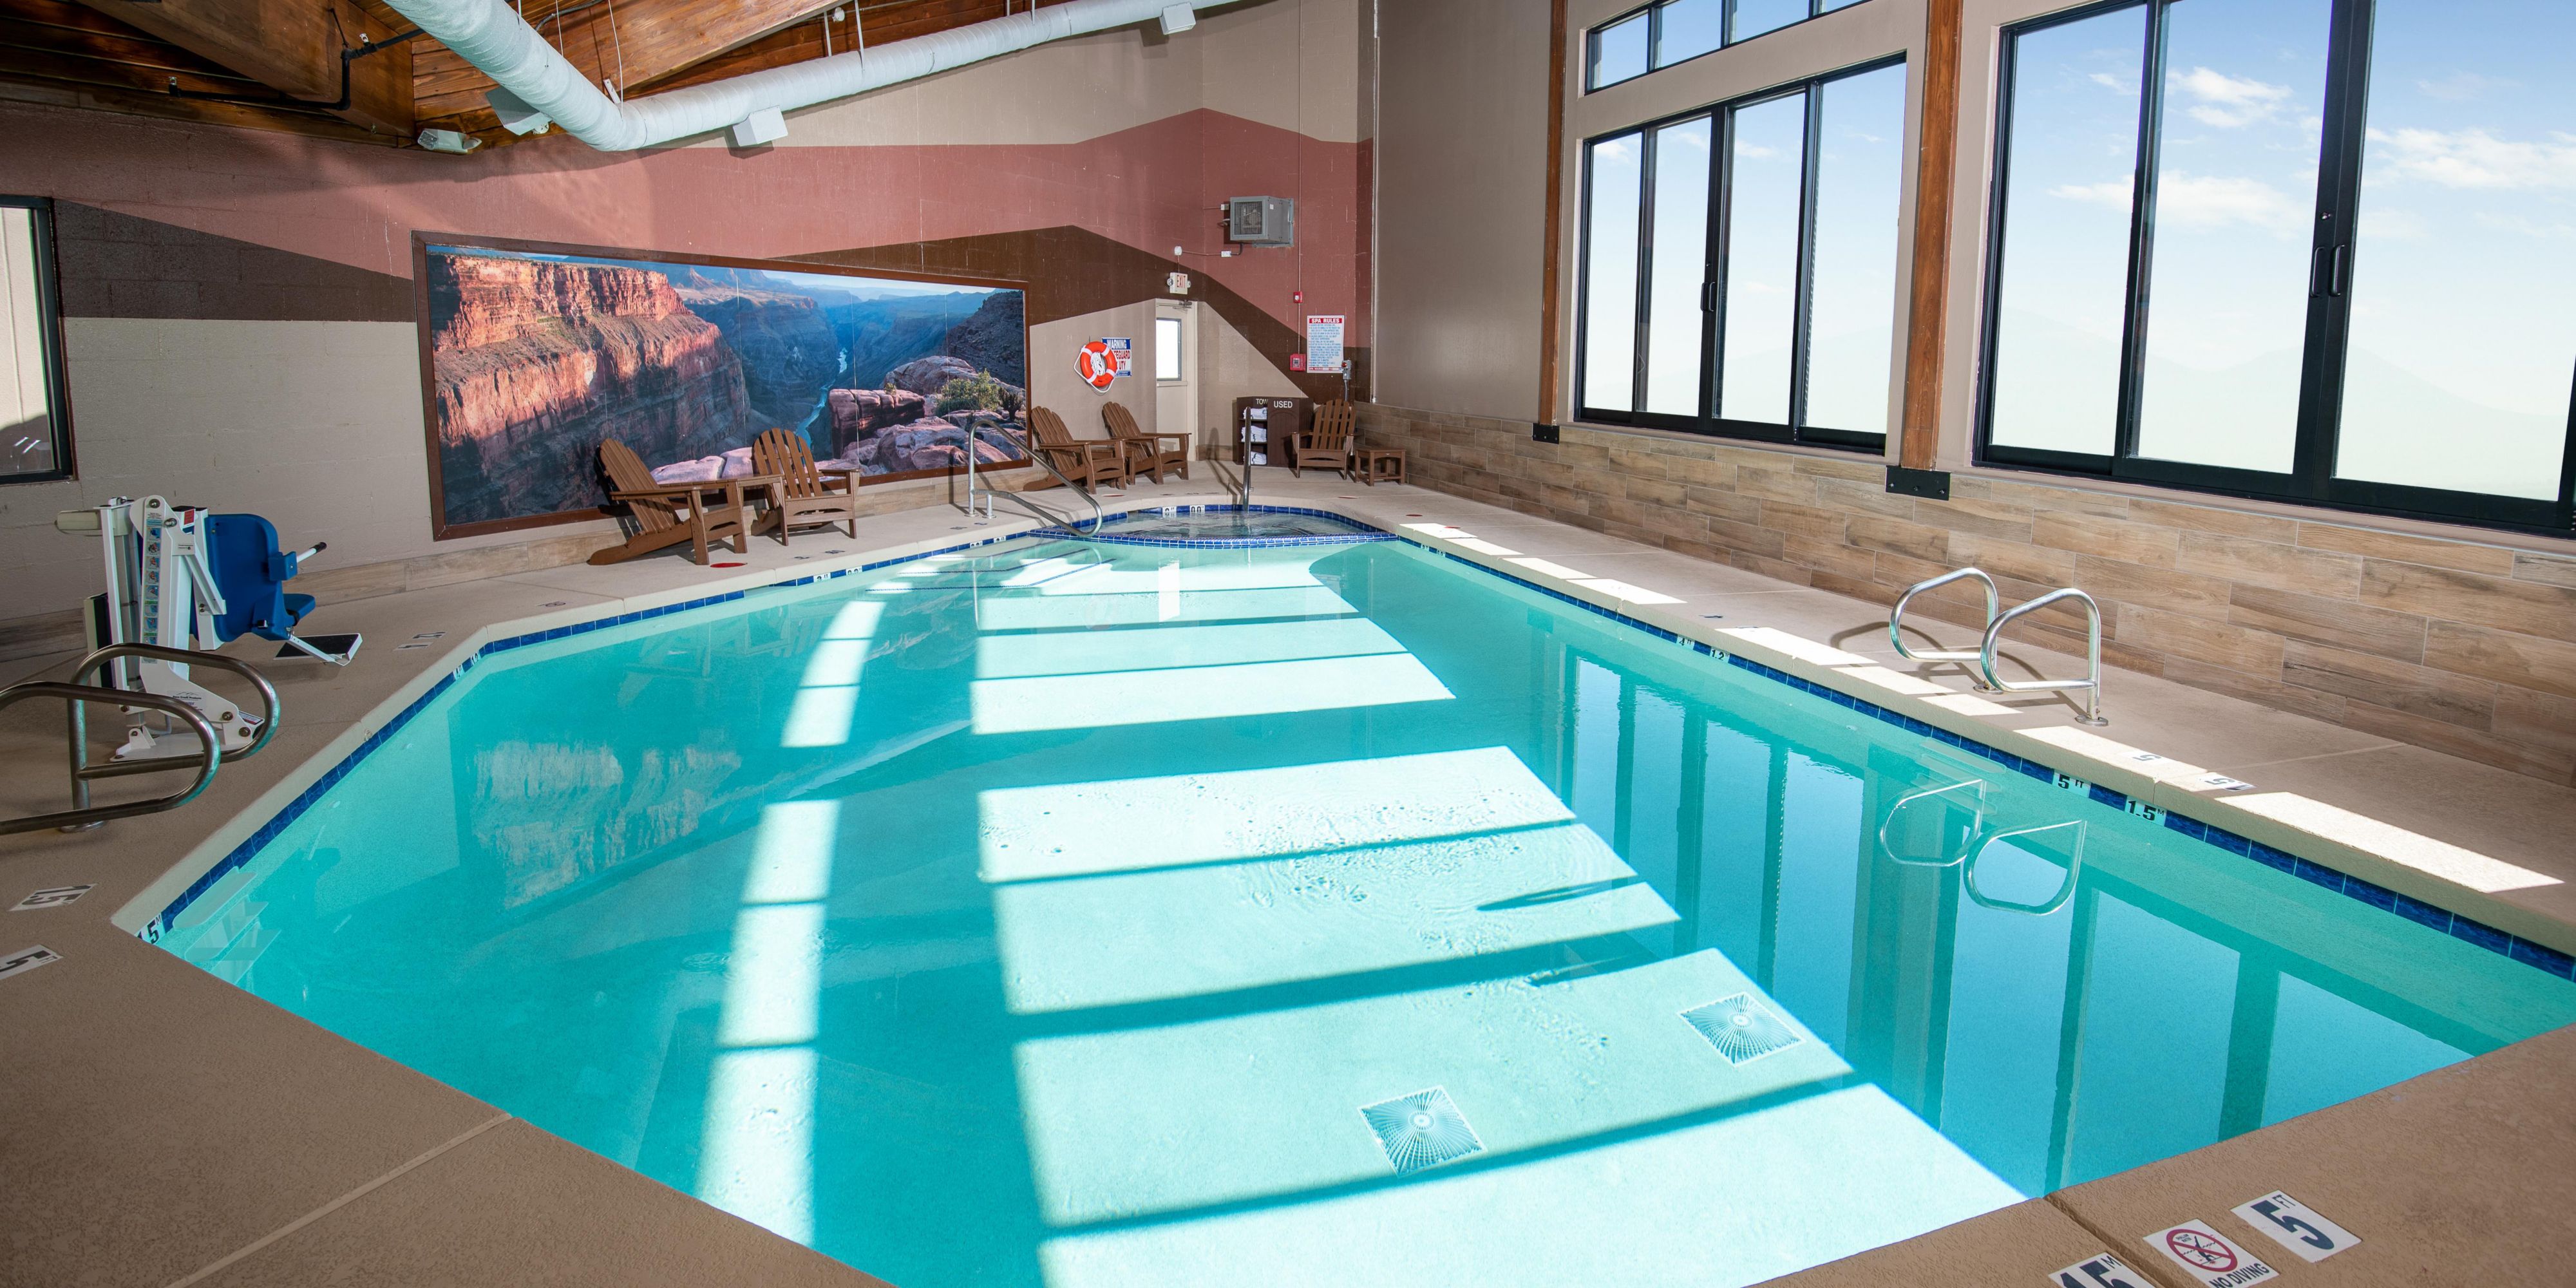 Unwind in our relaxing Indoor Swimming Pool and Whirlpool after an enjoyable day at the Grand Canyon.